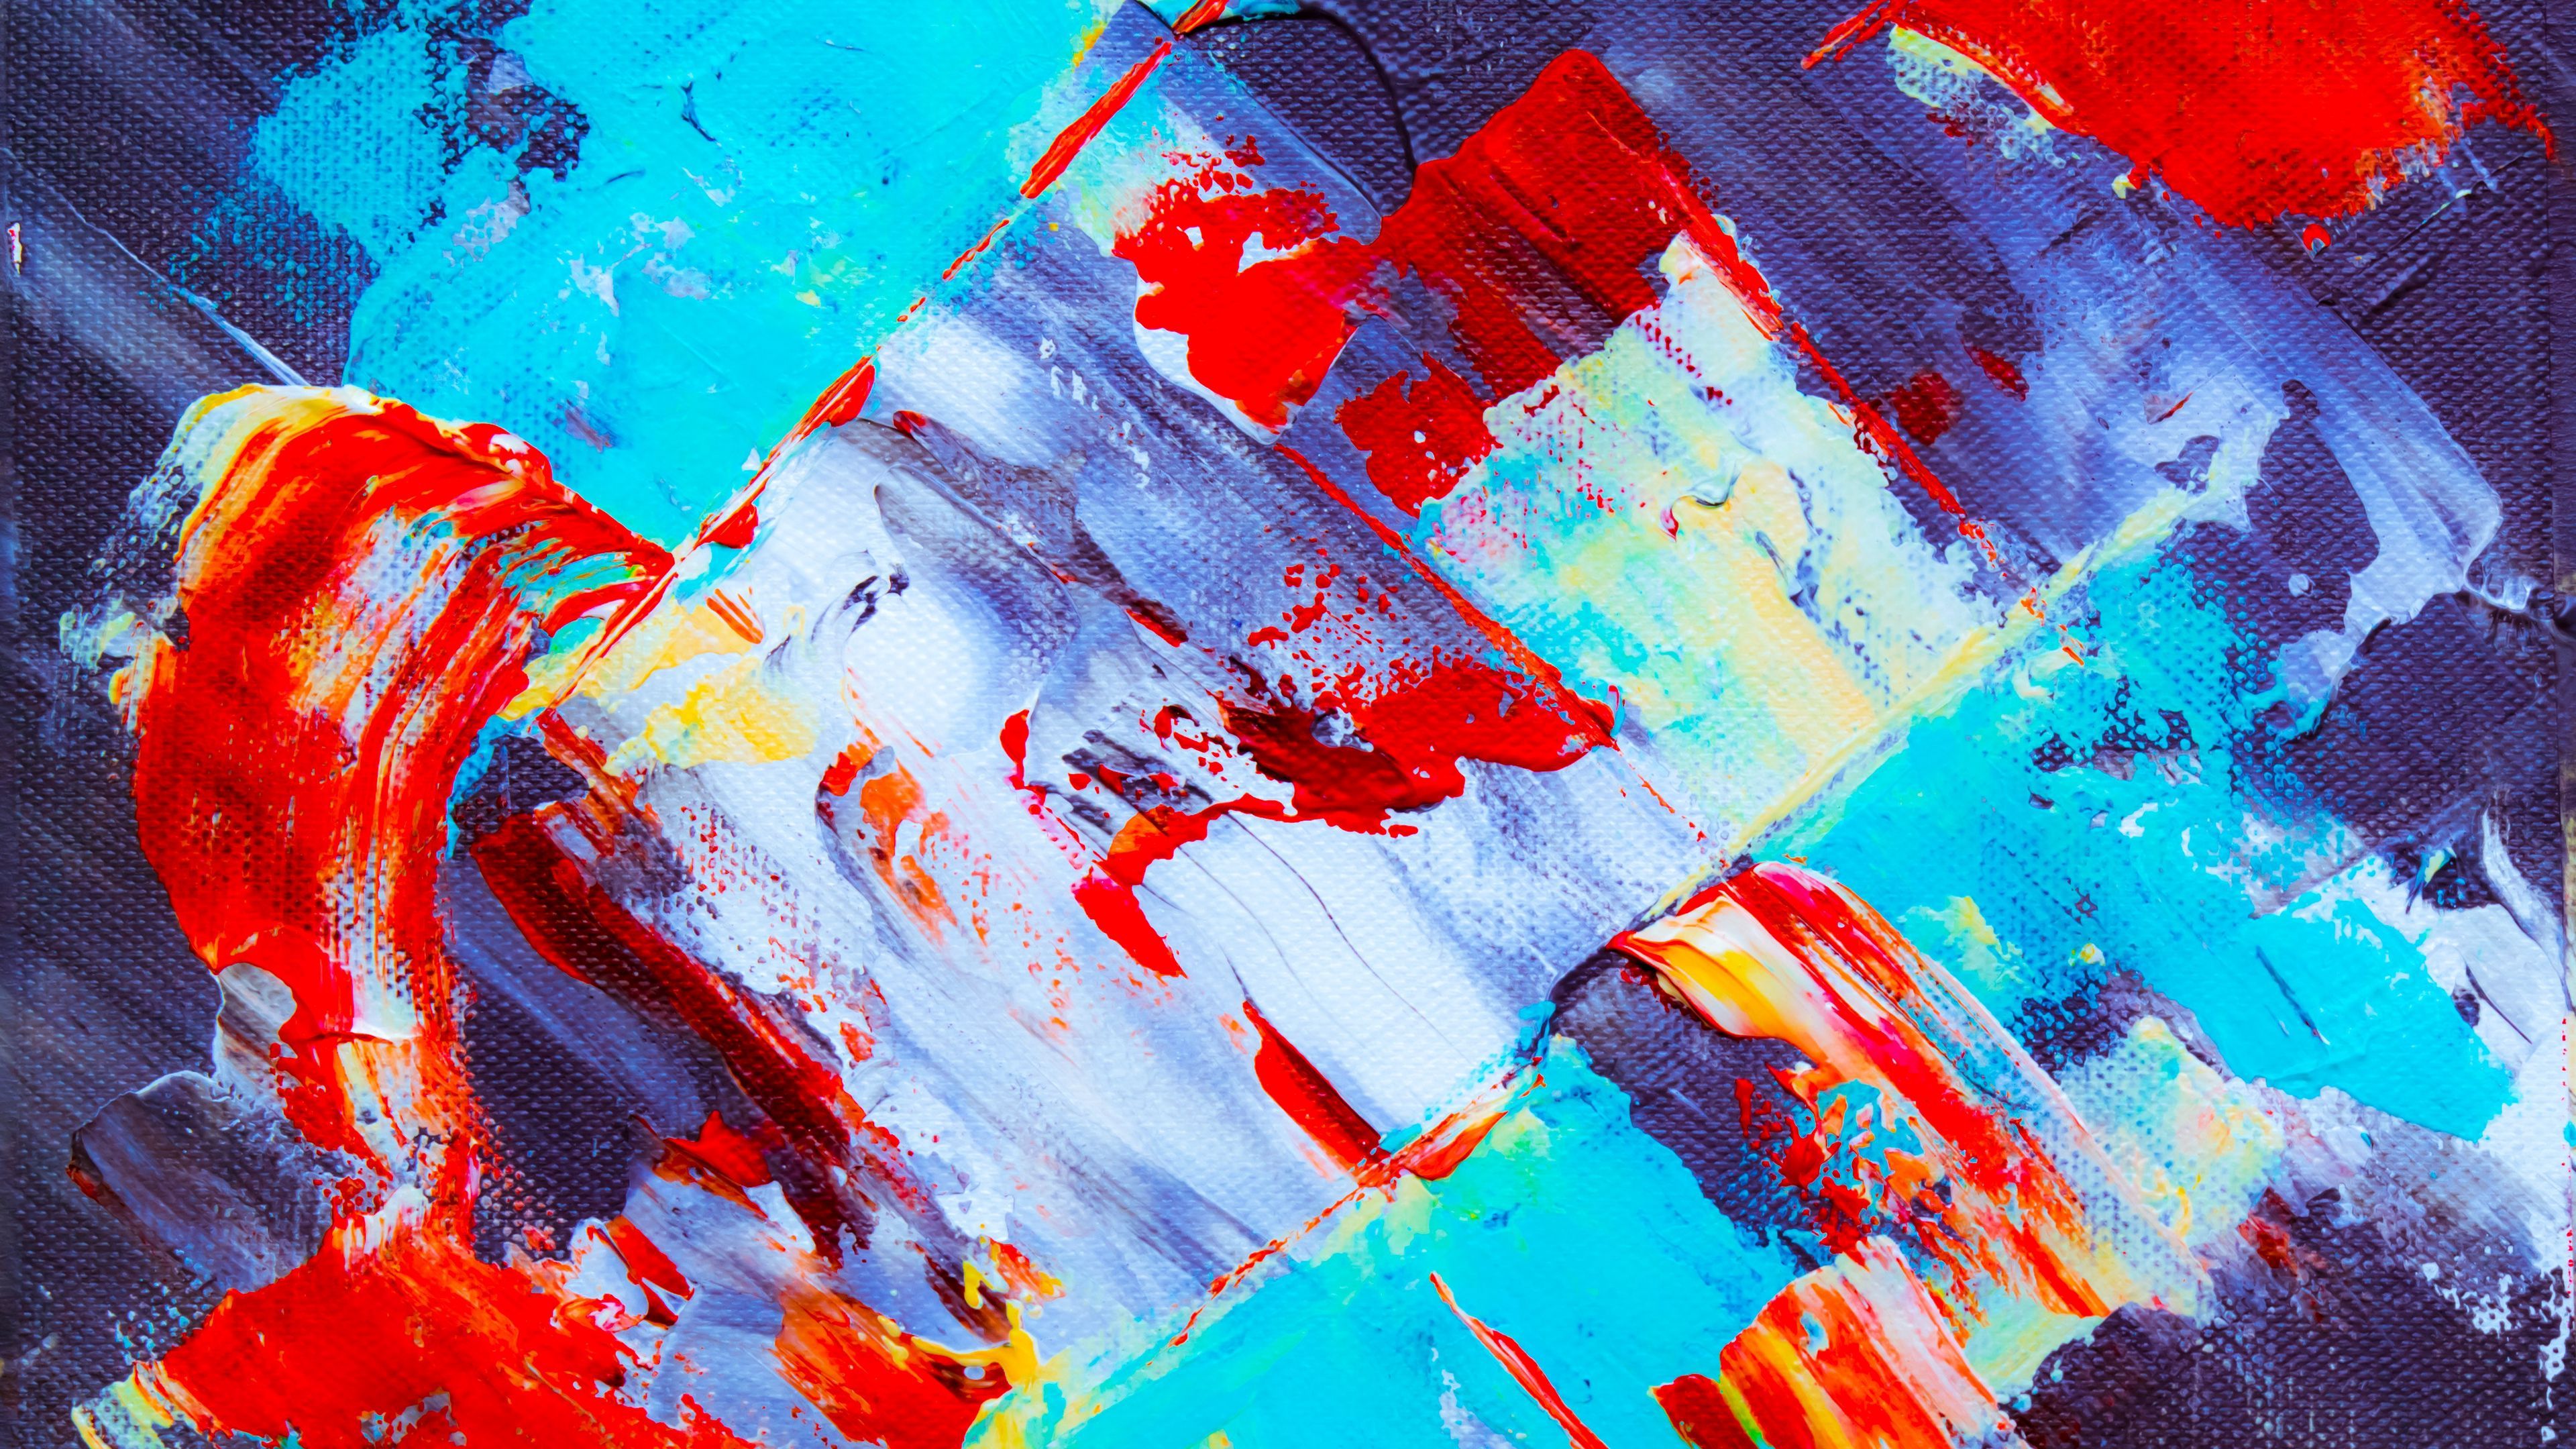 Download wallpaper 3840x2160 canvas, paint, acrylic, stains, chaos, abstract 4k uhd 16:9 HD background